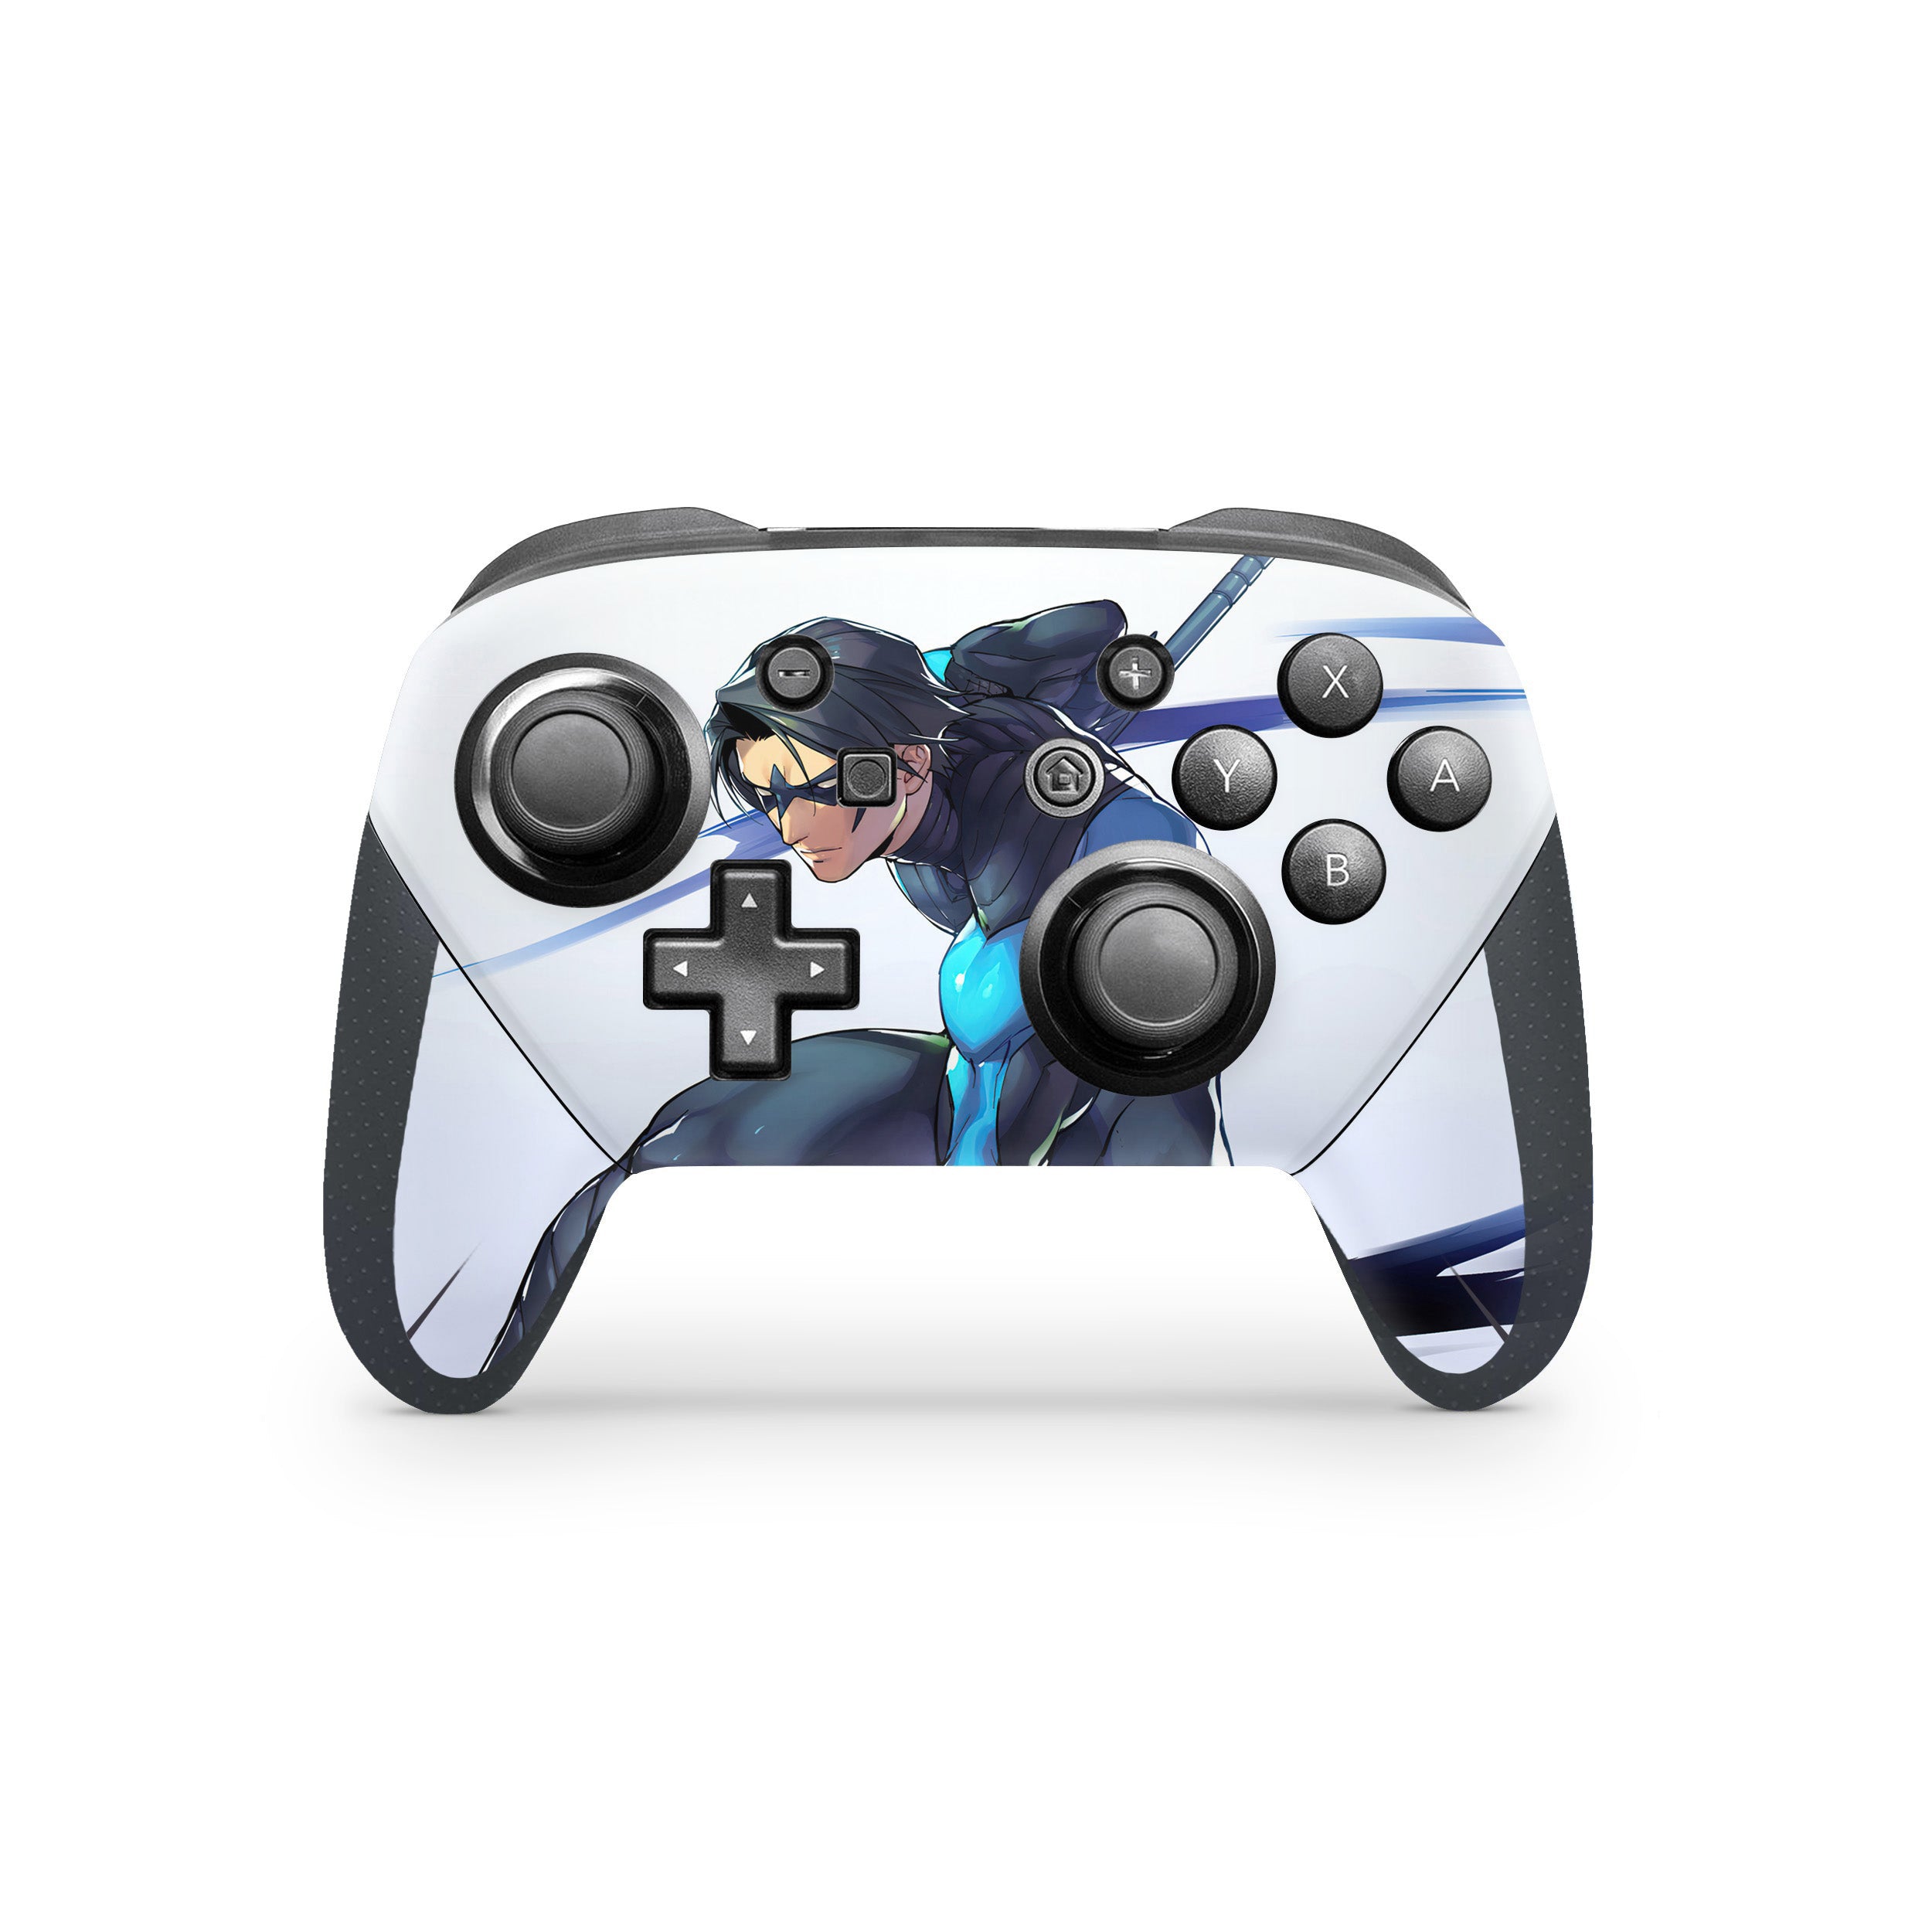 A video game skin featuring a DC Comics Nightwing design for the Switch Pro Controller.